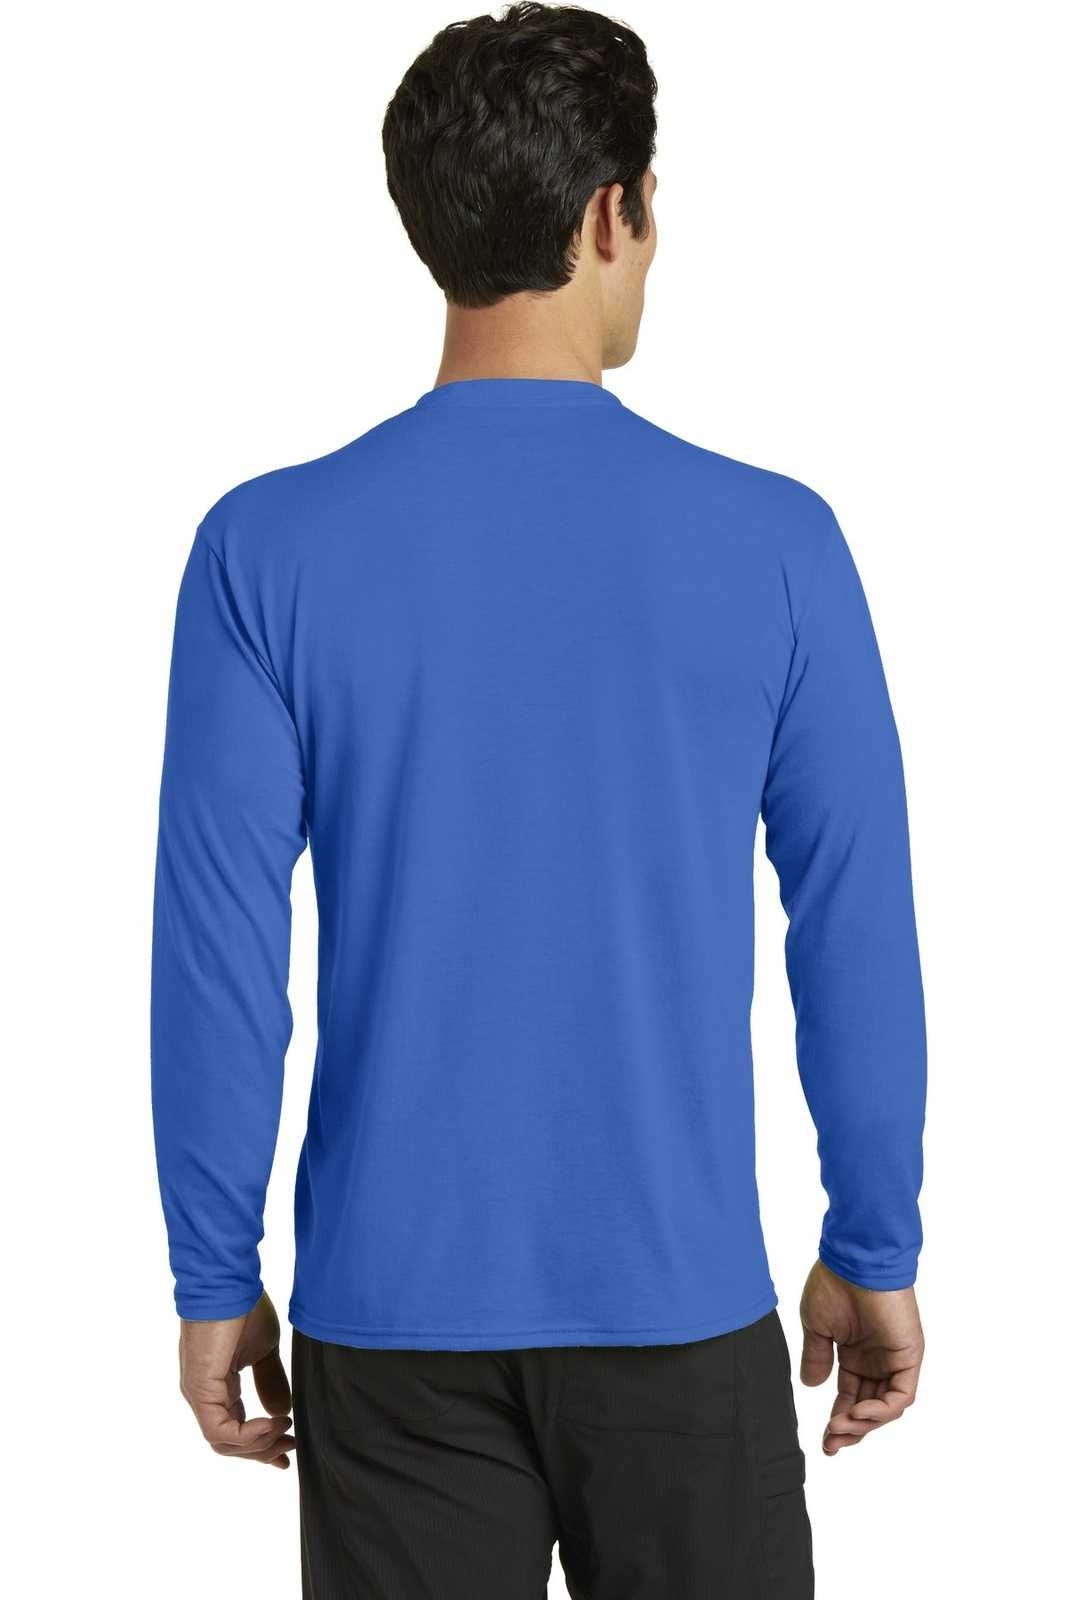 Port & Company PC381LS Long Sleeve Performance Blend Tee - True Royal - HIT a Double - 1